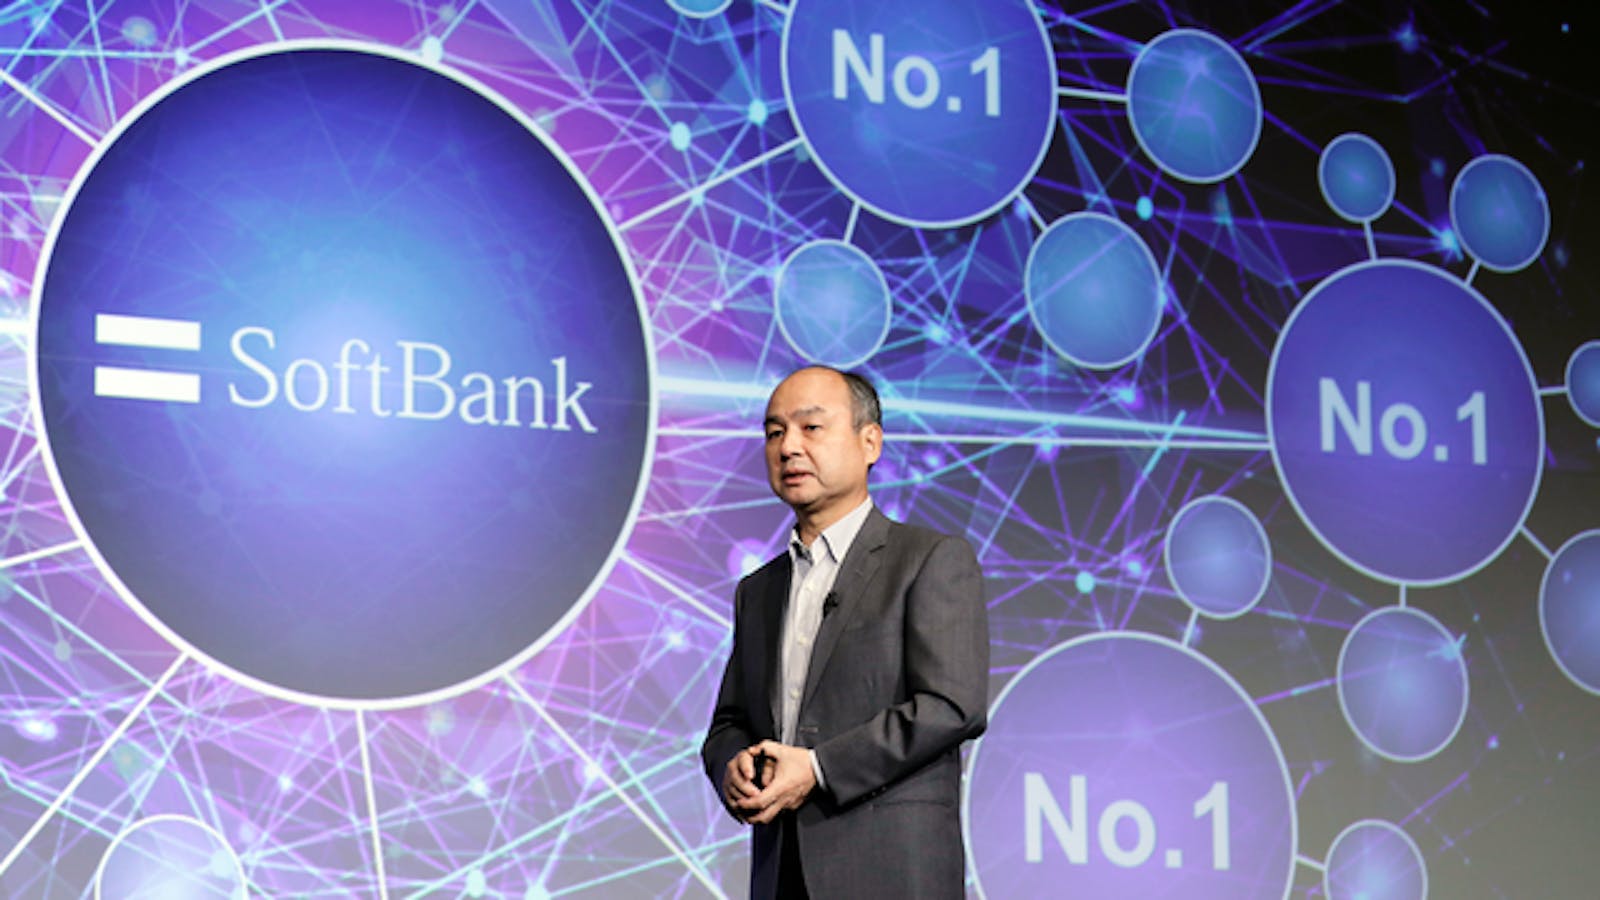 SoftBank CEO Masayoshi Son at a news conference in Tokyo last month. Photo: Bloomberg